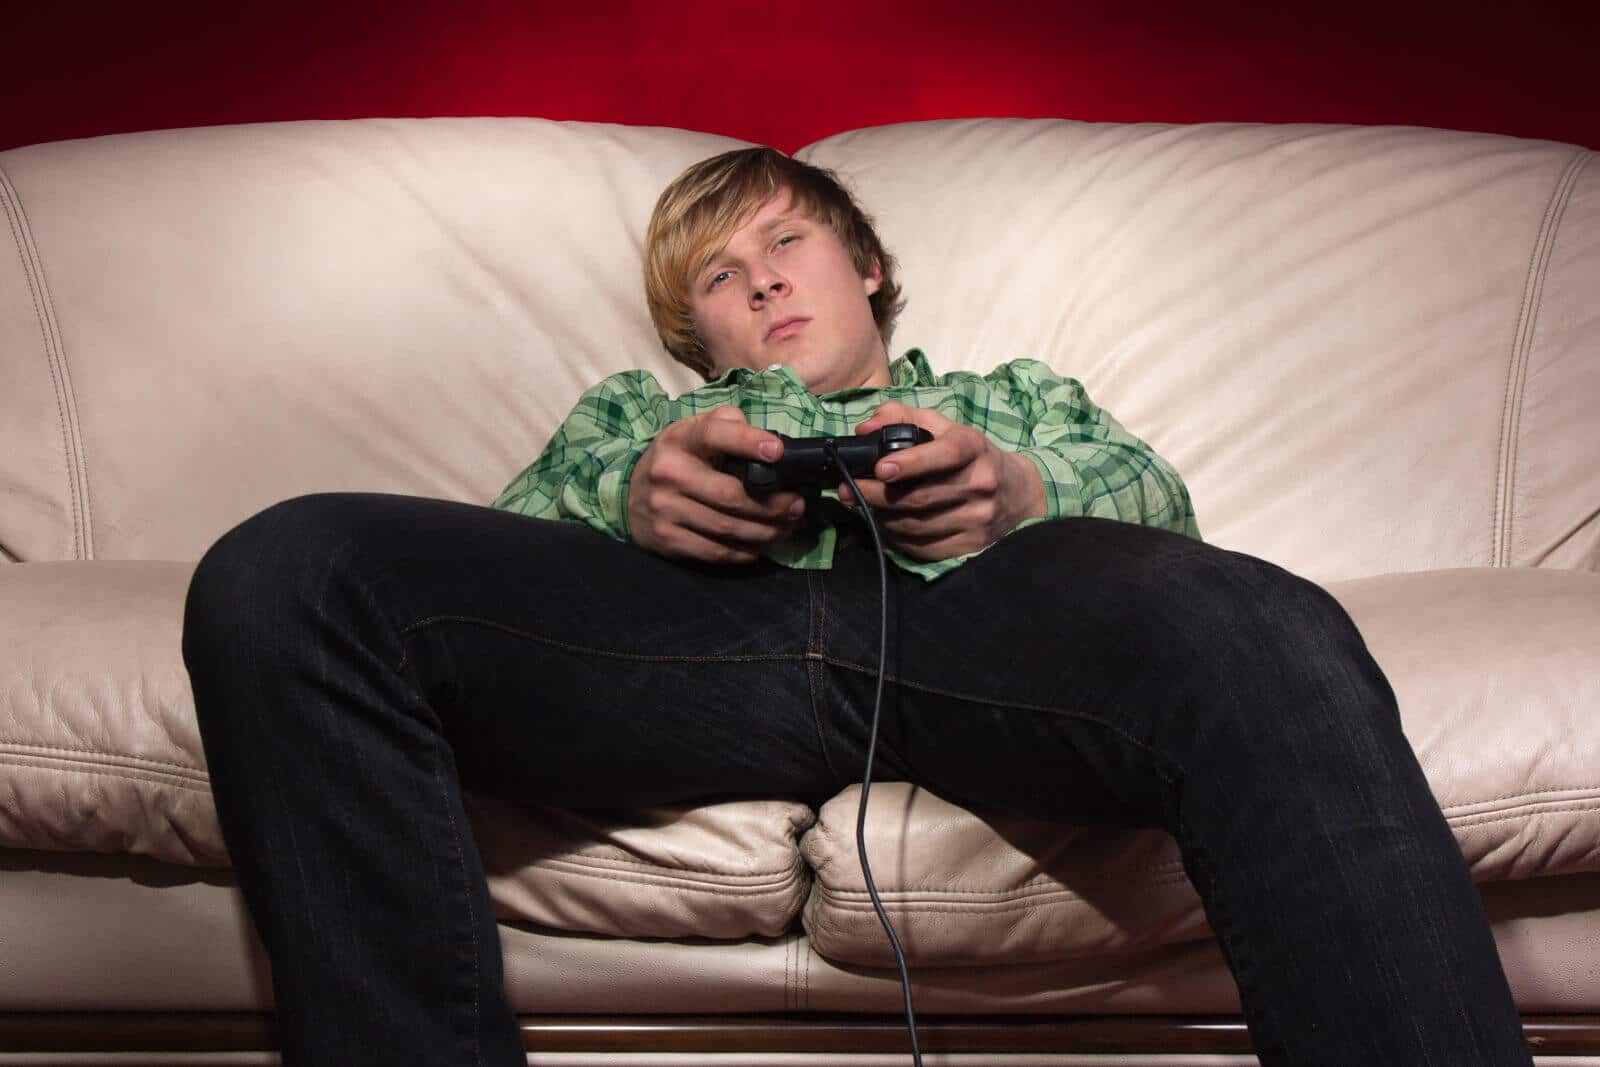 What Are The Five Most Addictive Video Games? - Addiction Center